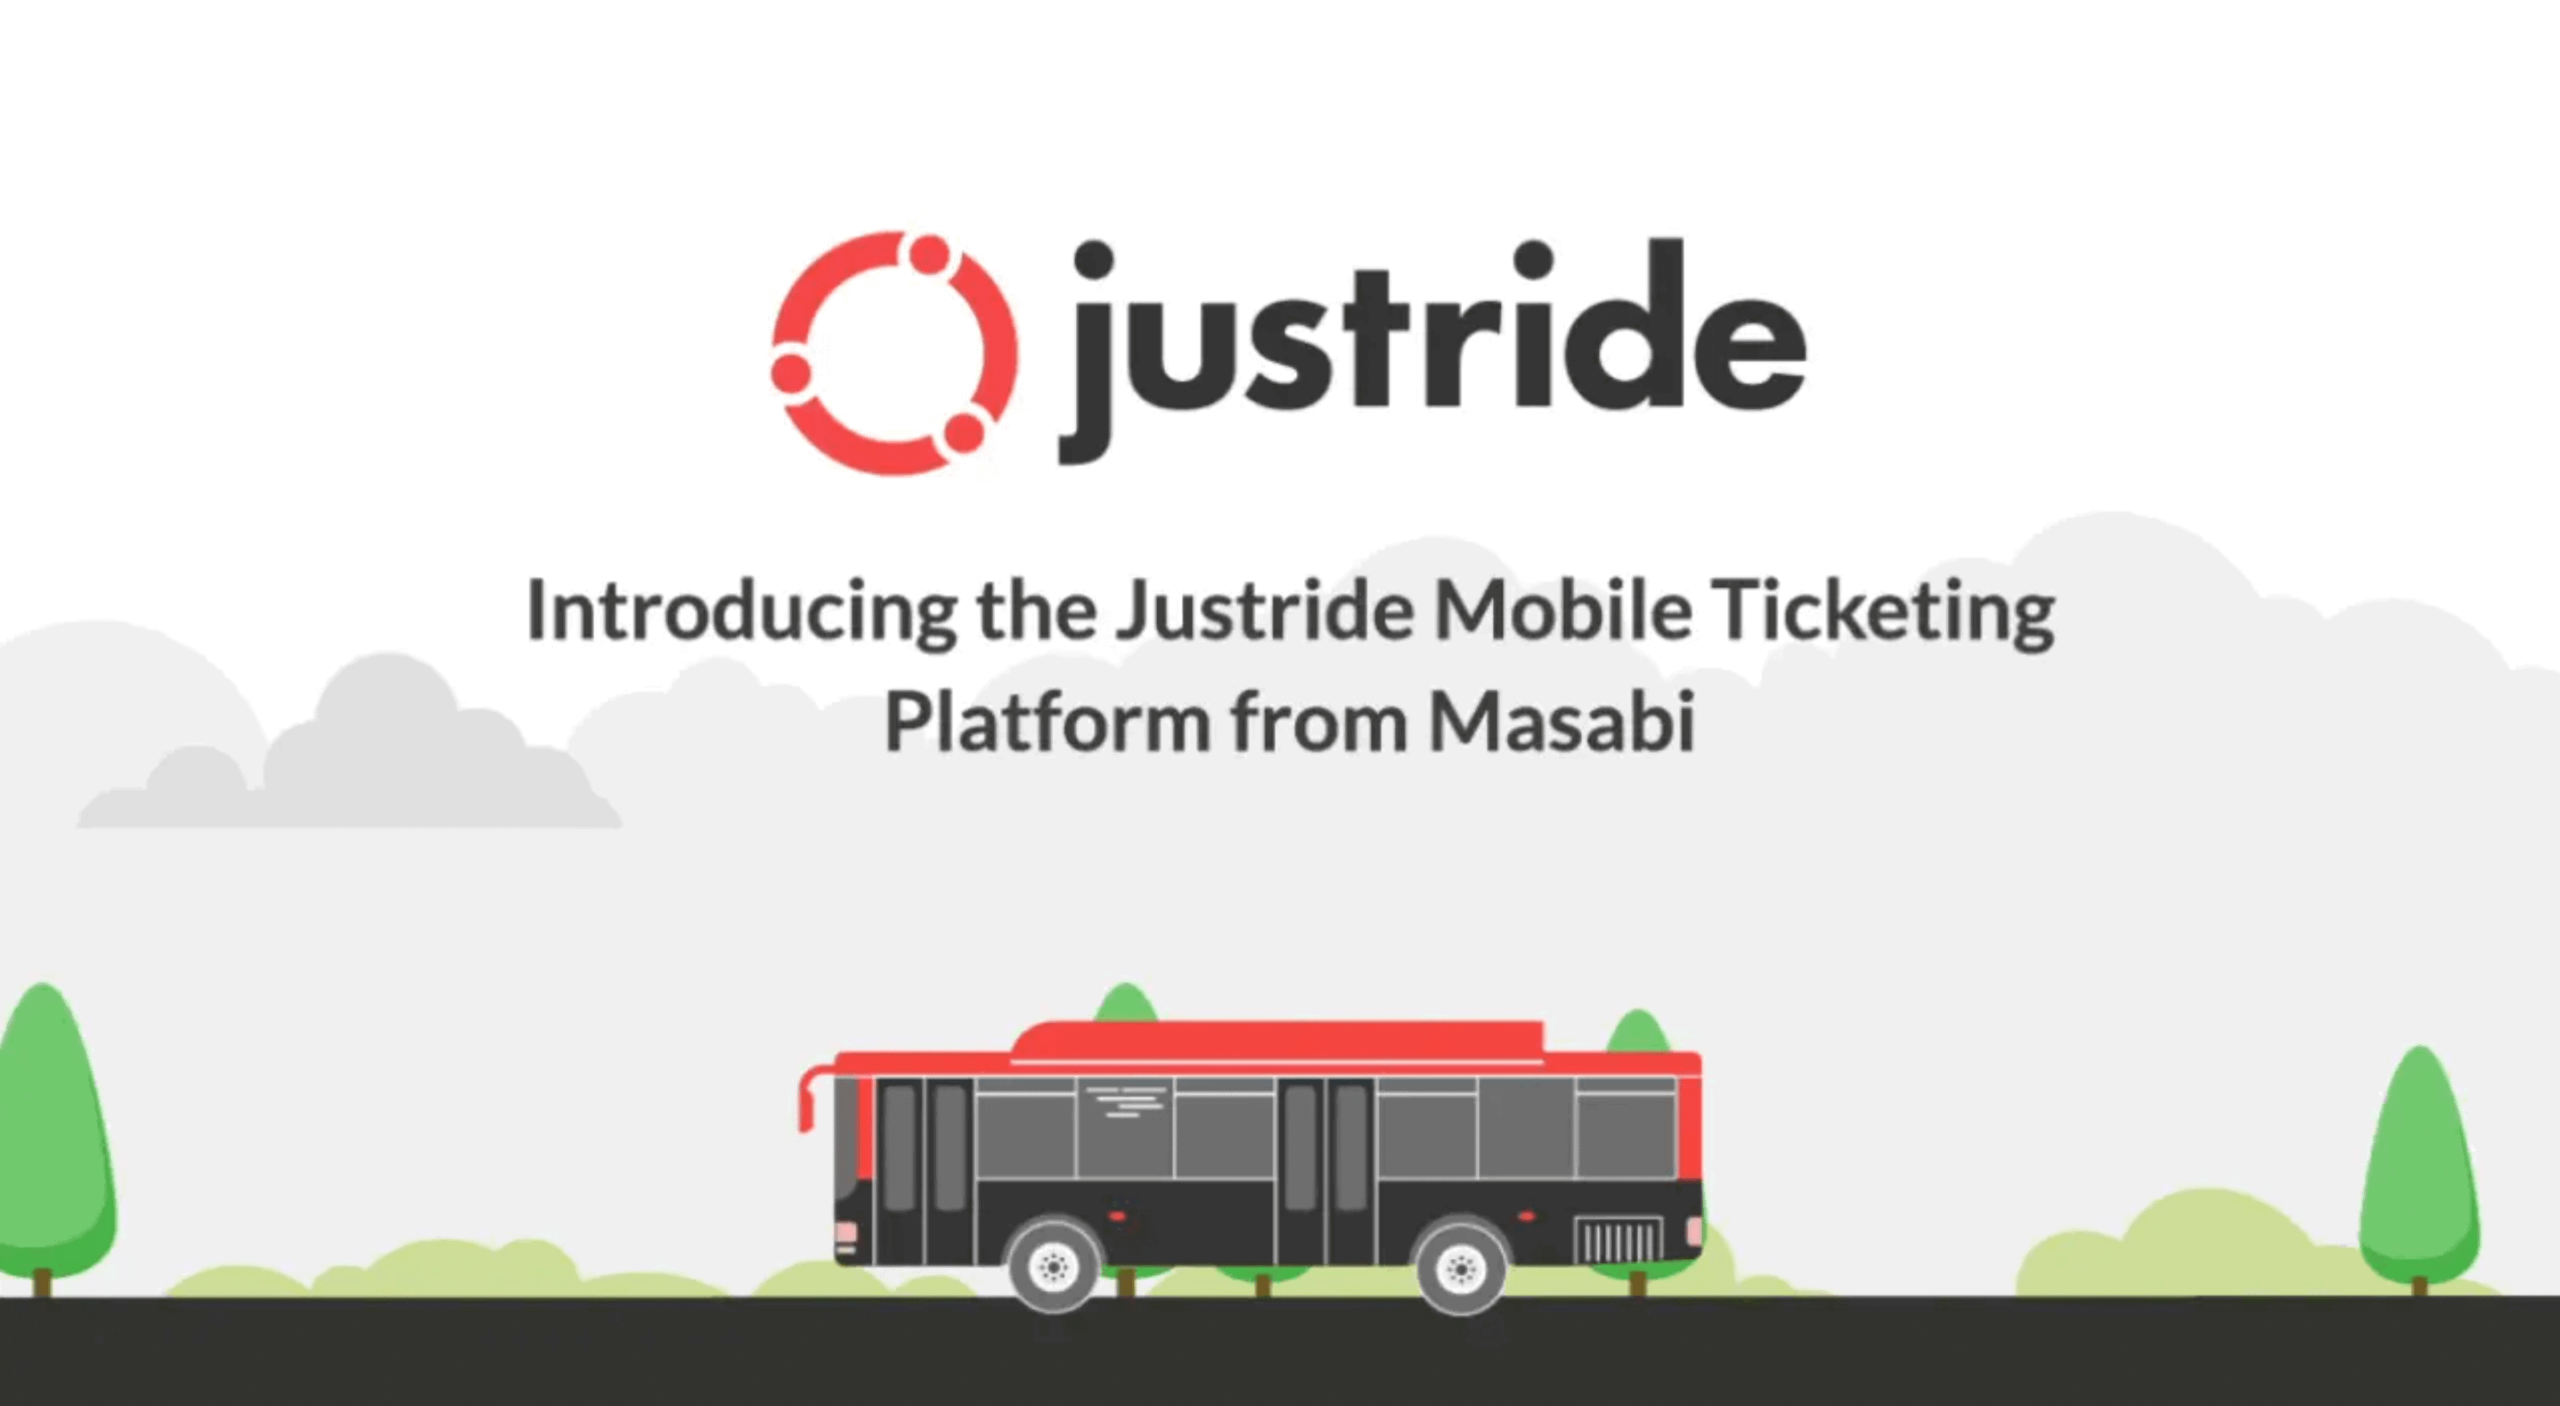 Introducing The Justride Mobile Ticketing Platform from Masabi